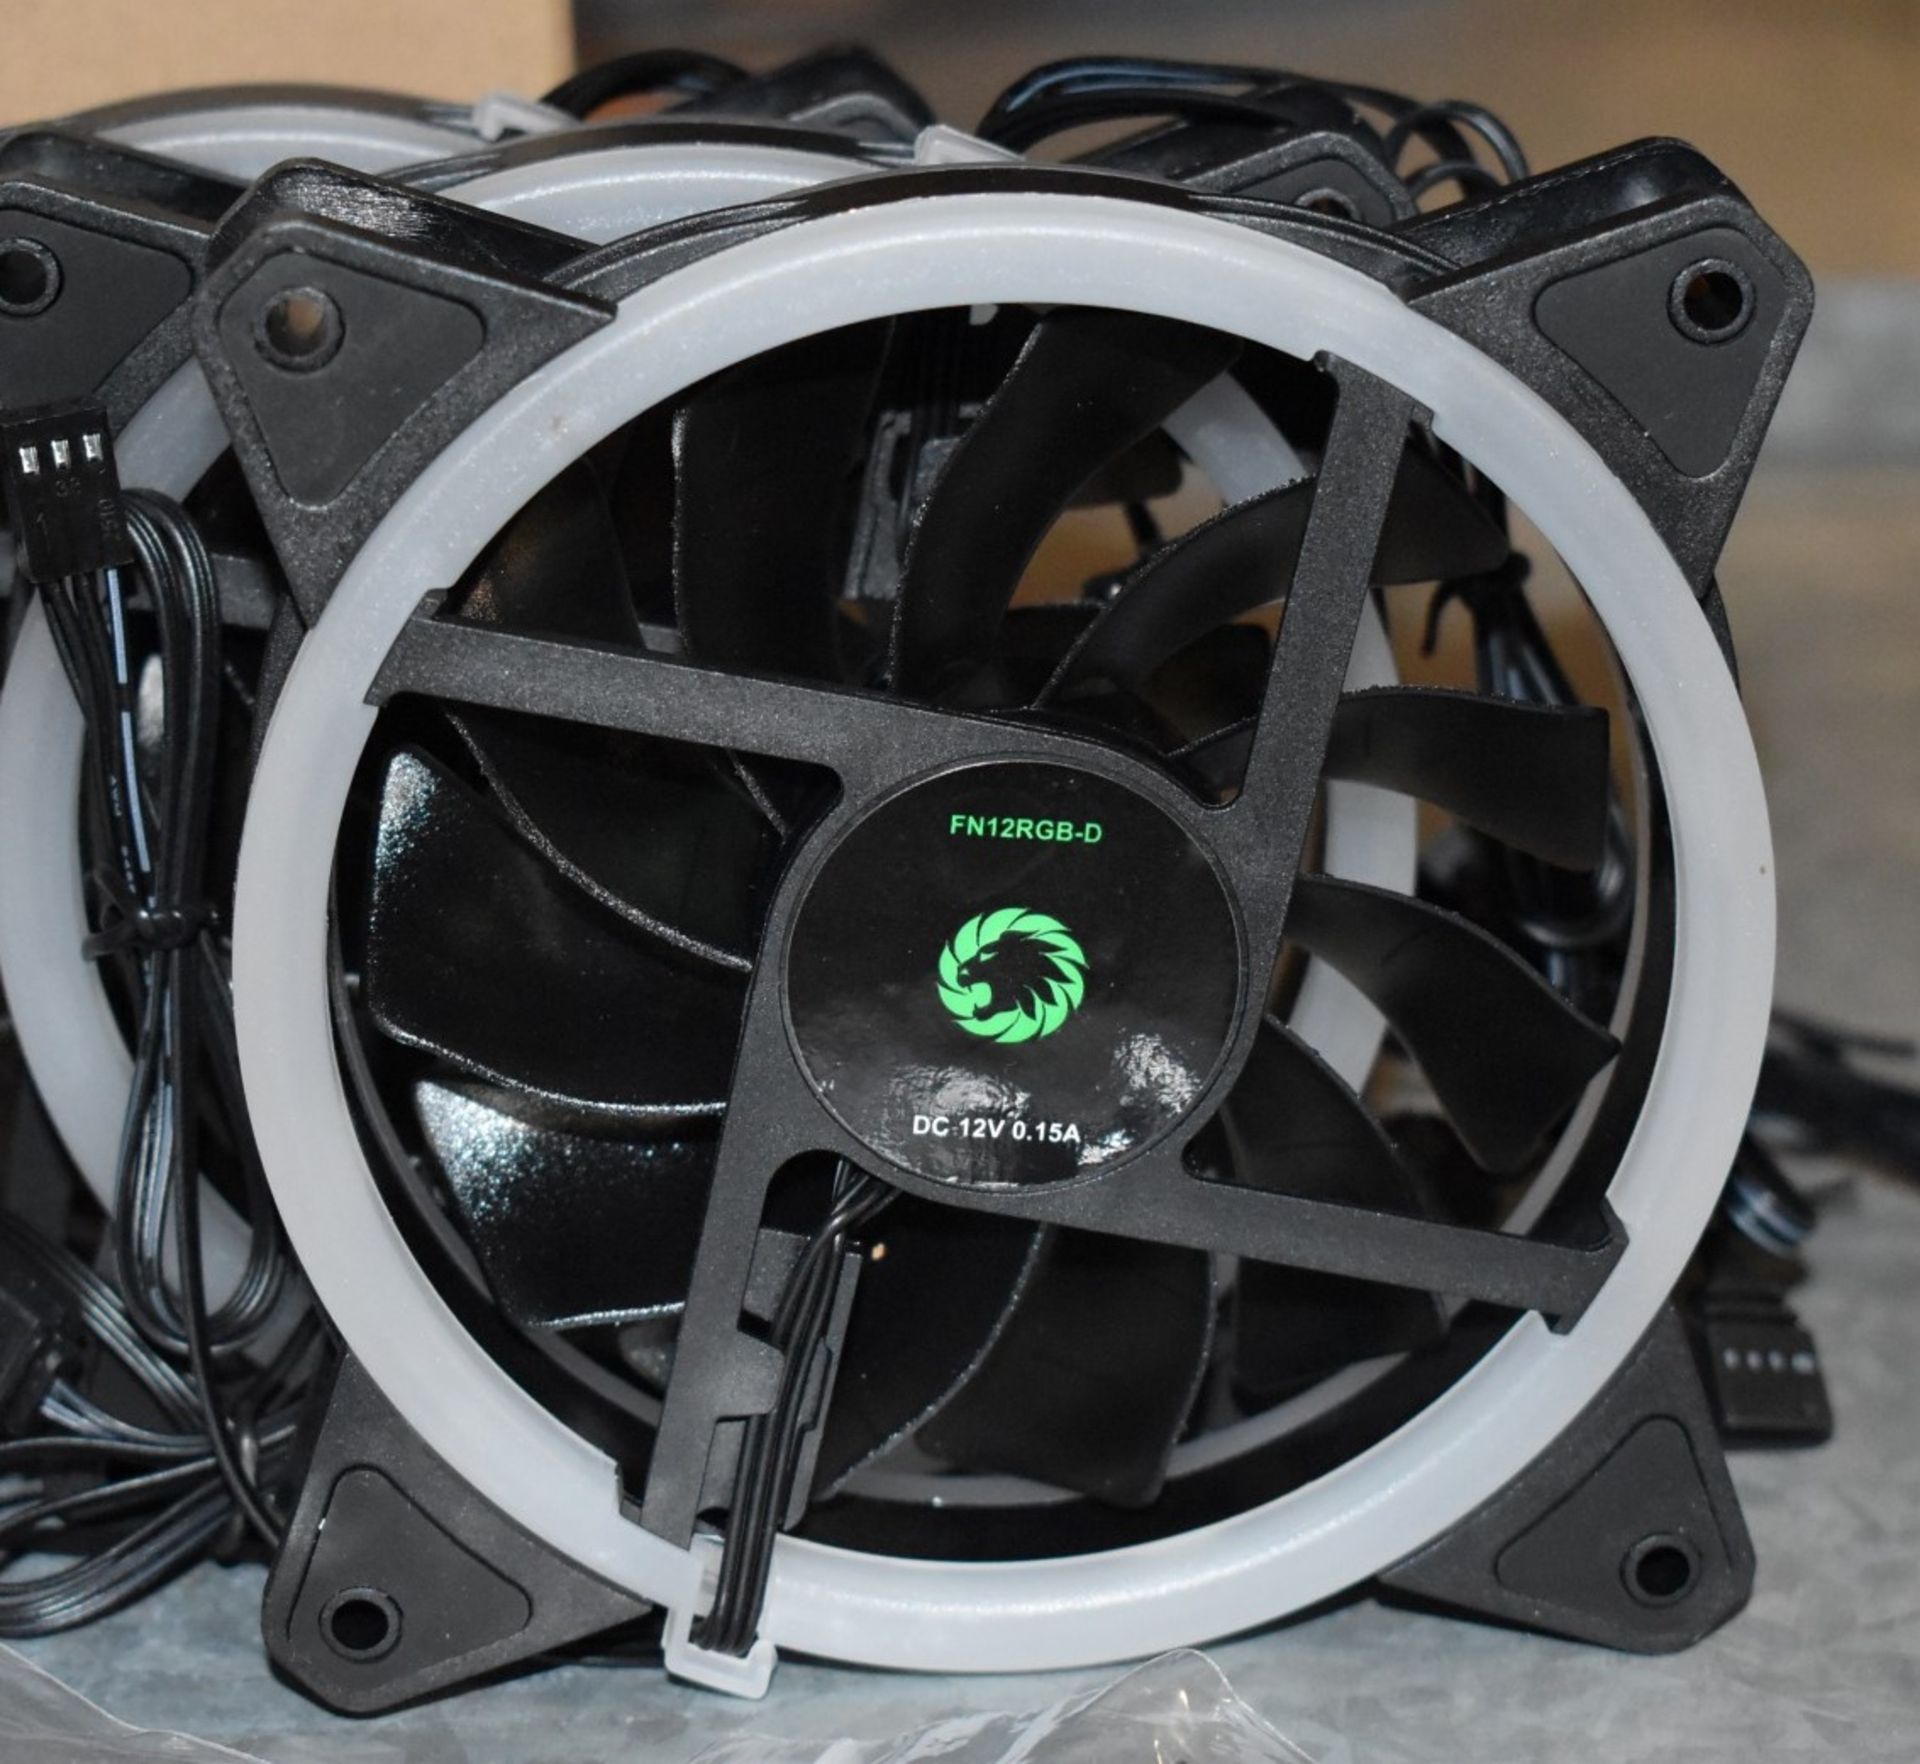 10 x GameMax LED Fan Packs For PC Gaming Cases - Each Packs Include 3 x 120mm LED Case Fans, - Image 3 of 8